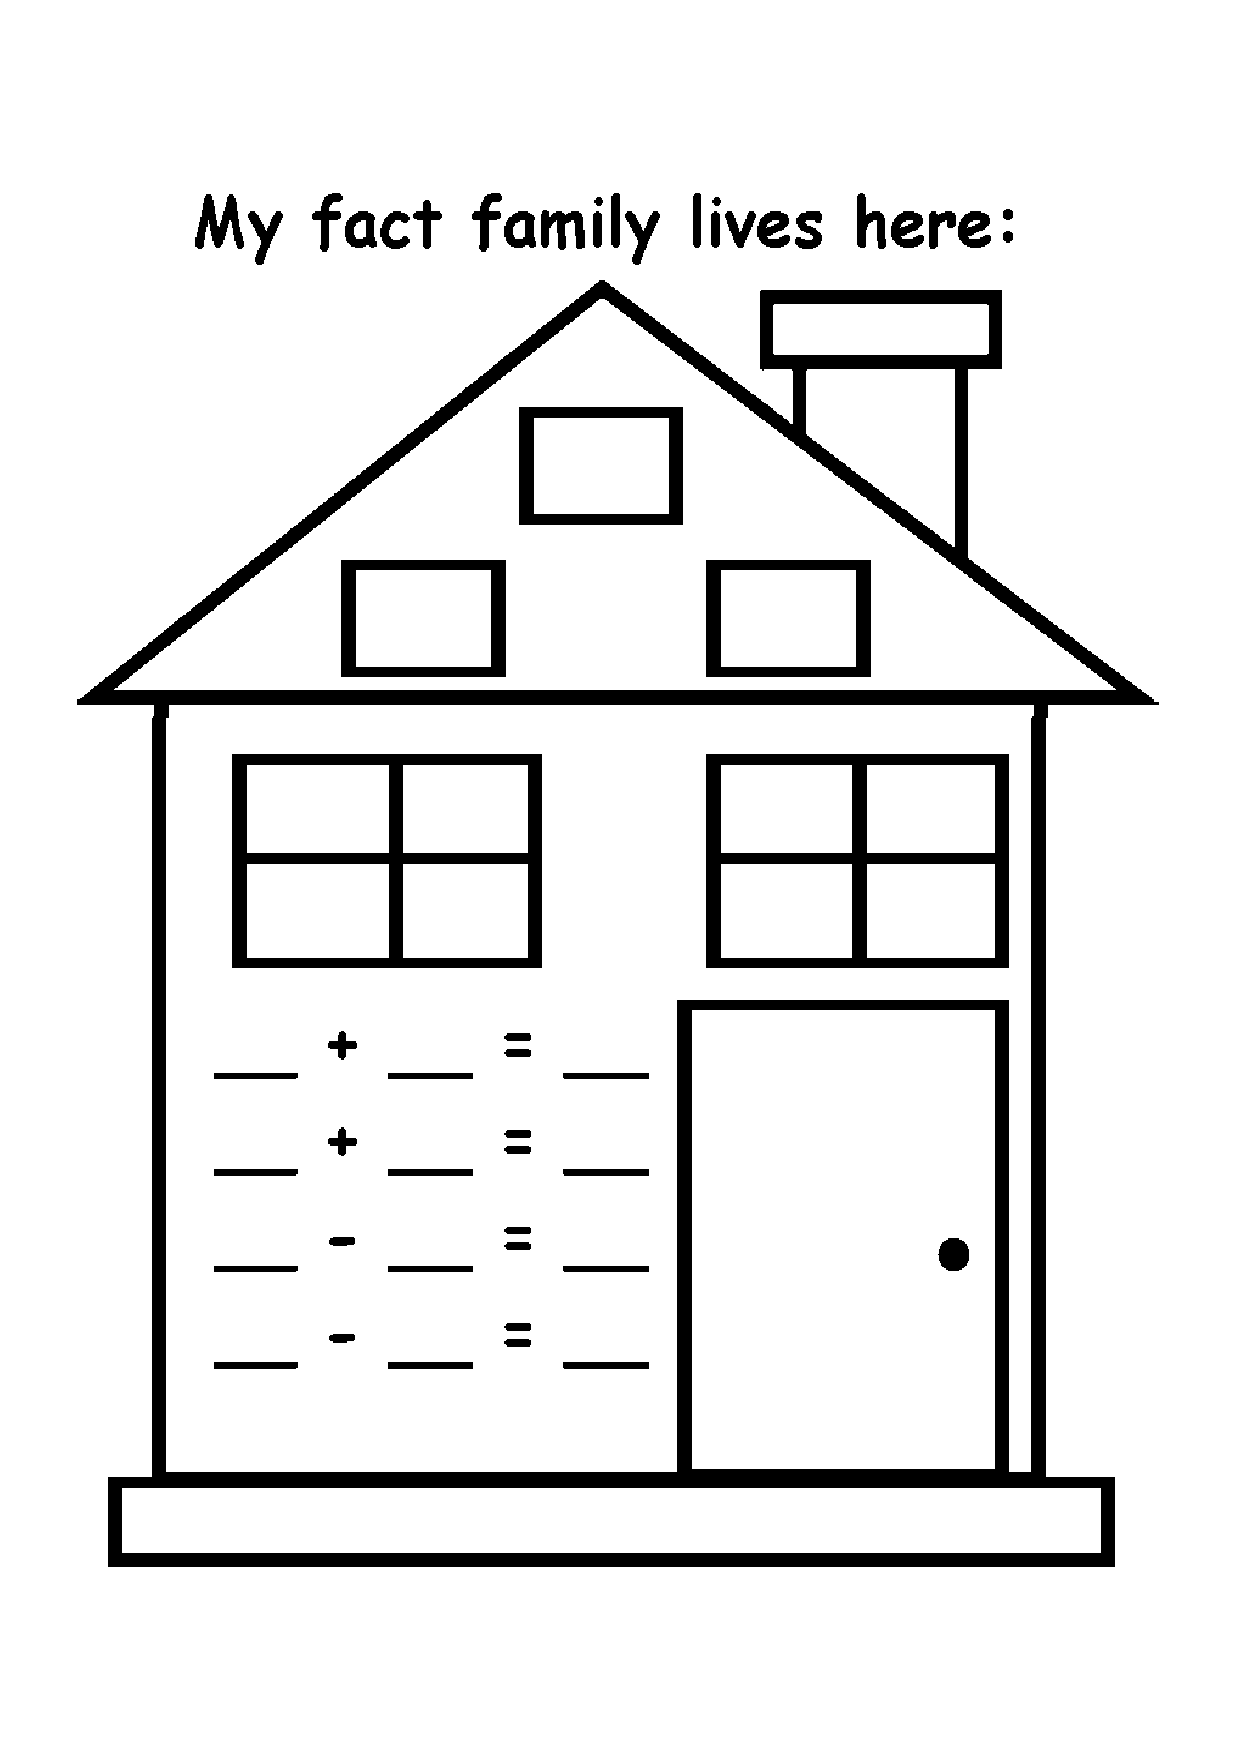 Fact Family Houses Worksheets Image